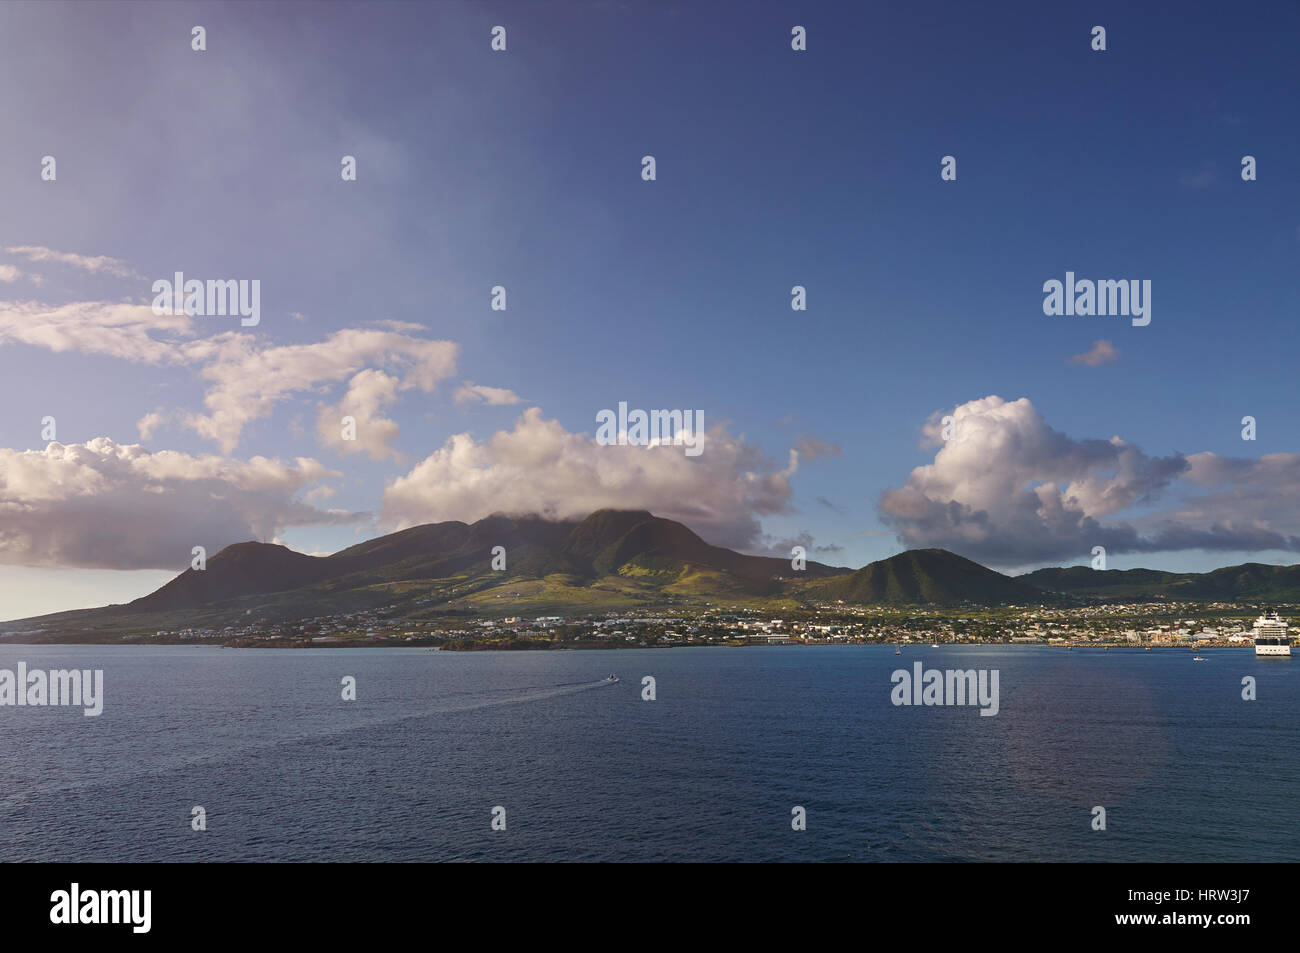 Panorama of St kitts island view from sea. Landscape of caribbean island on sunny day Stock Photo